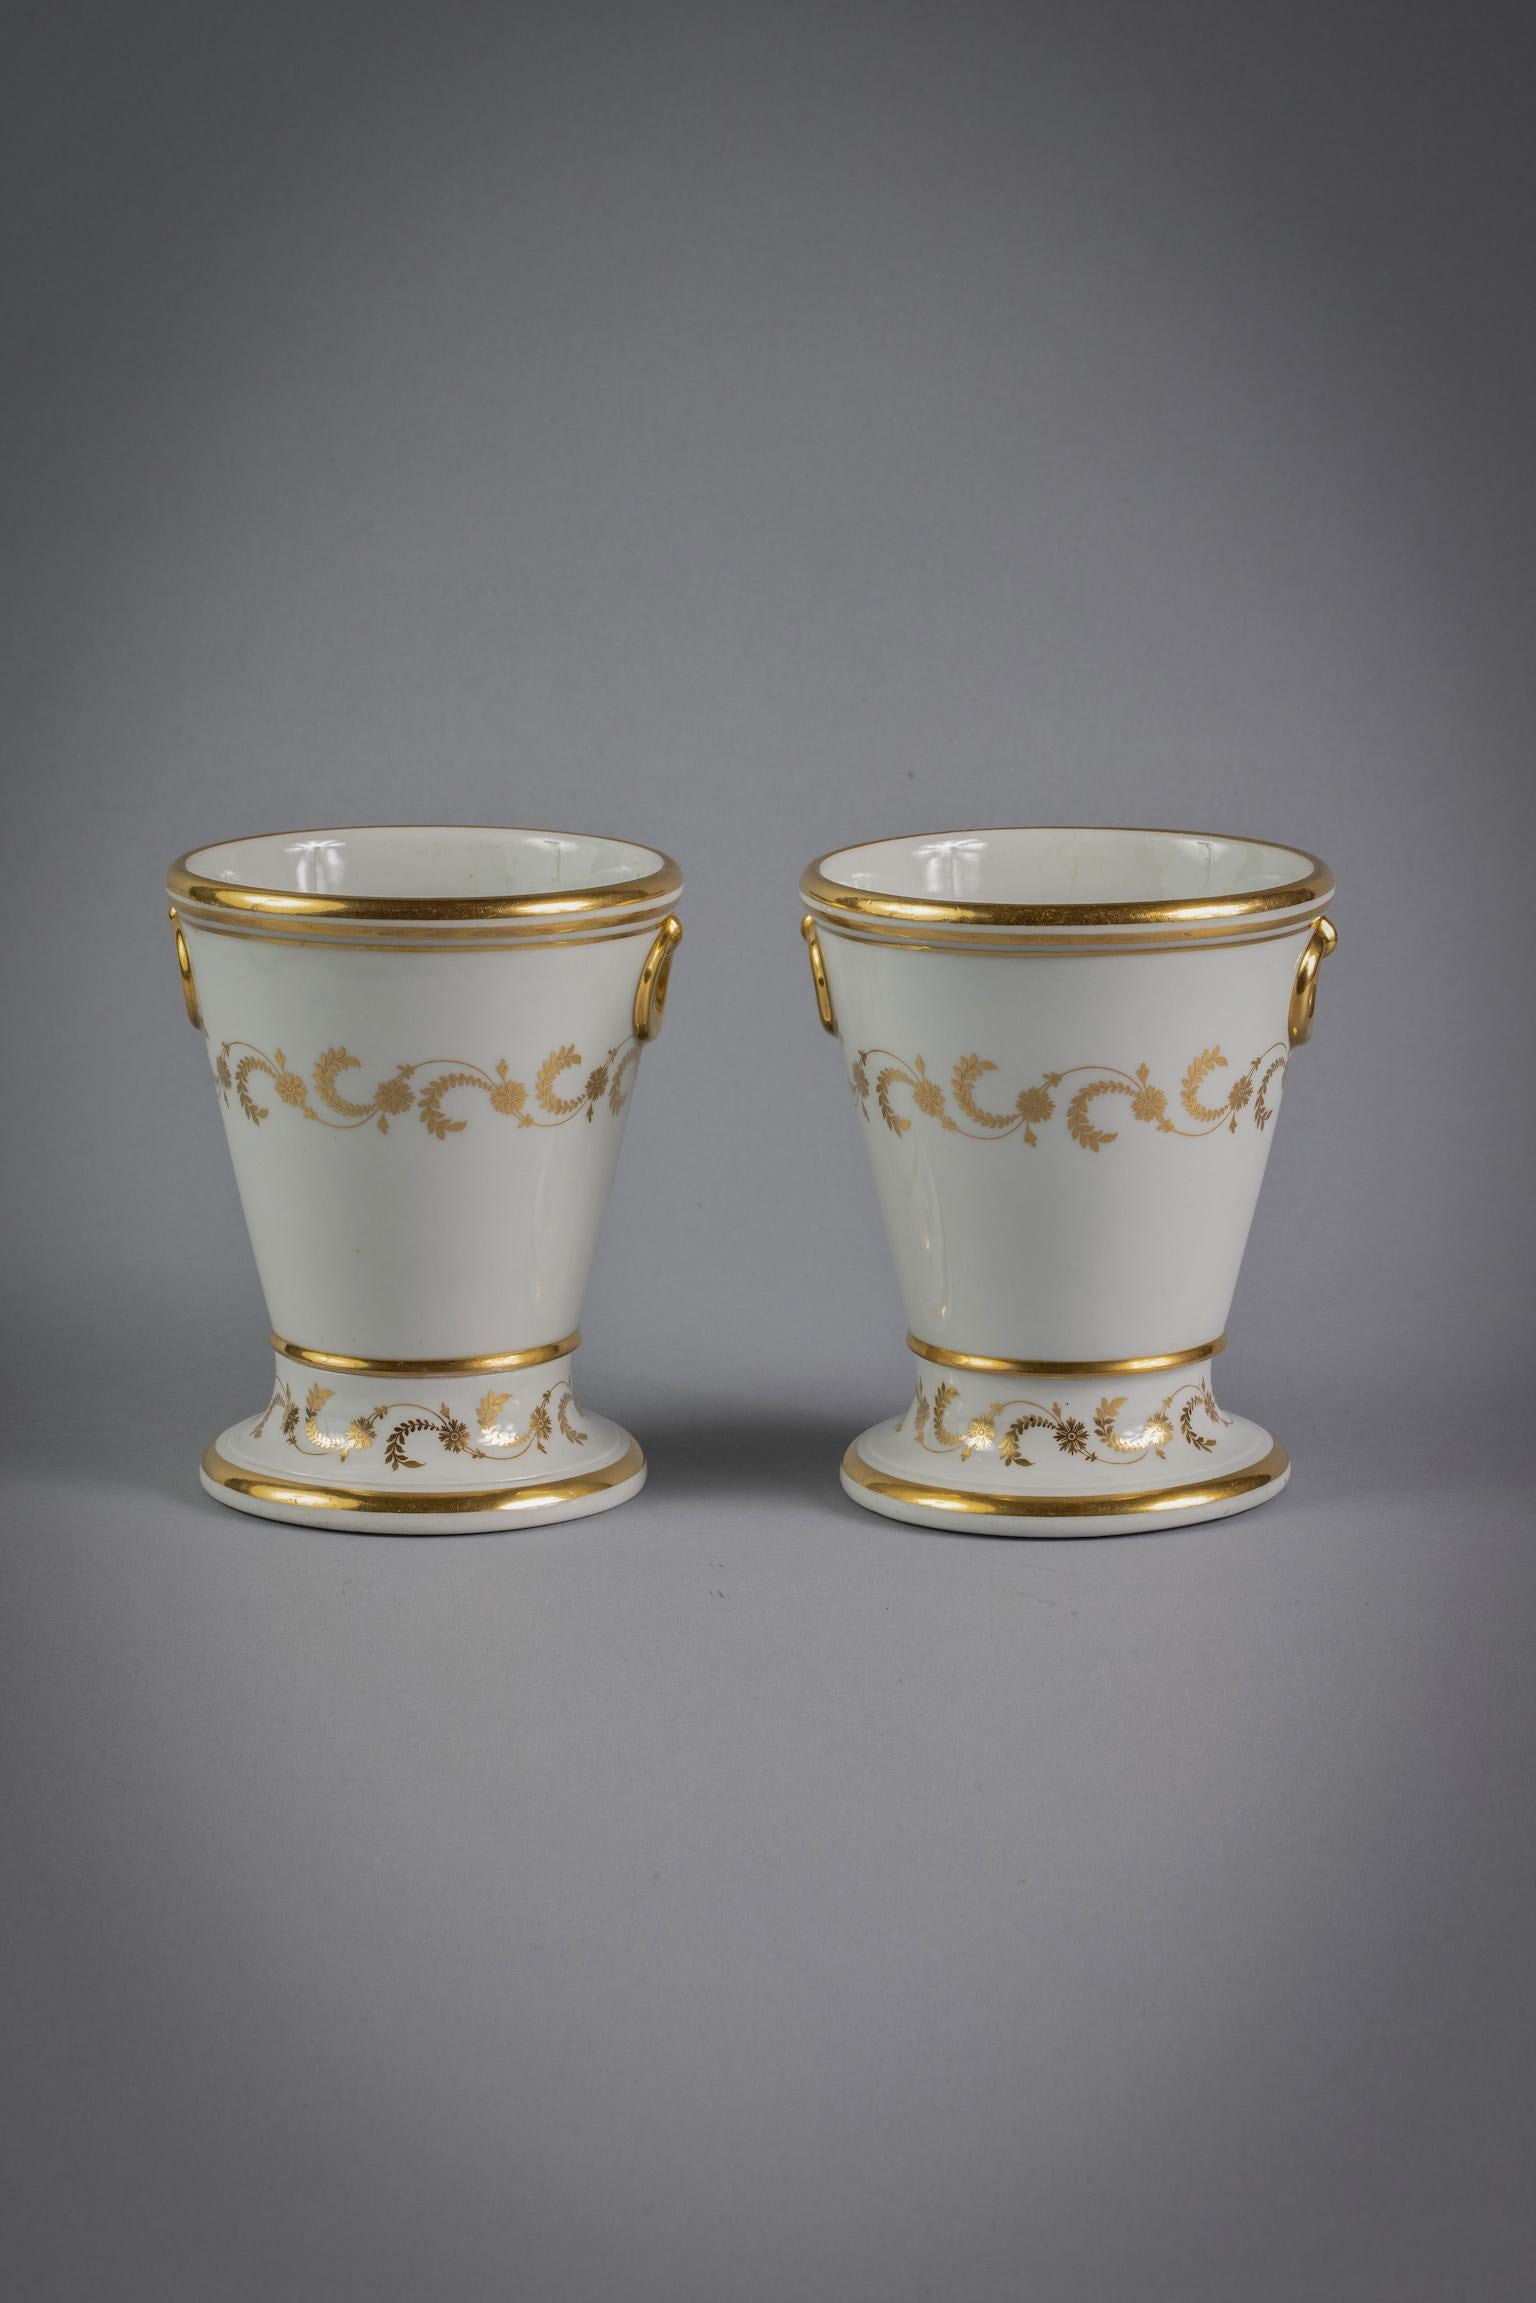 Pair of English Porcelain Cachepots on Stands, Flight Barr and Barr, circa 1800 In Good Condition For Sale In New York, NY